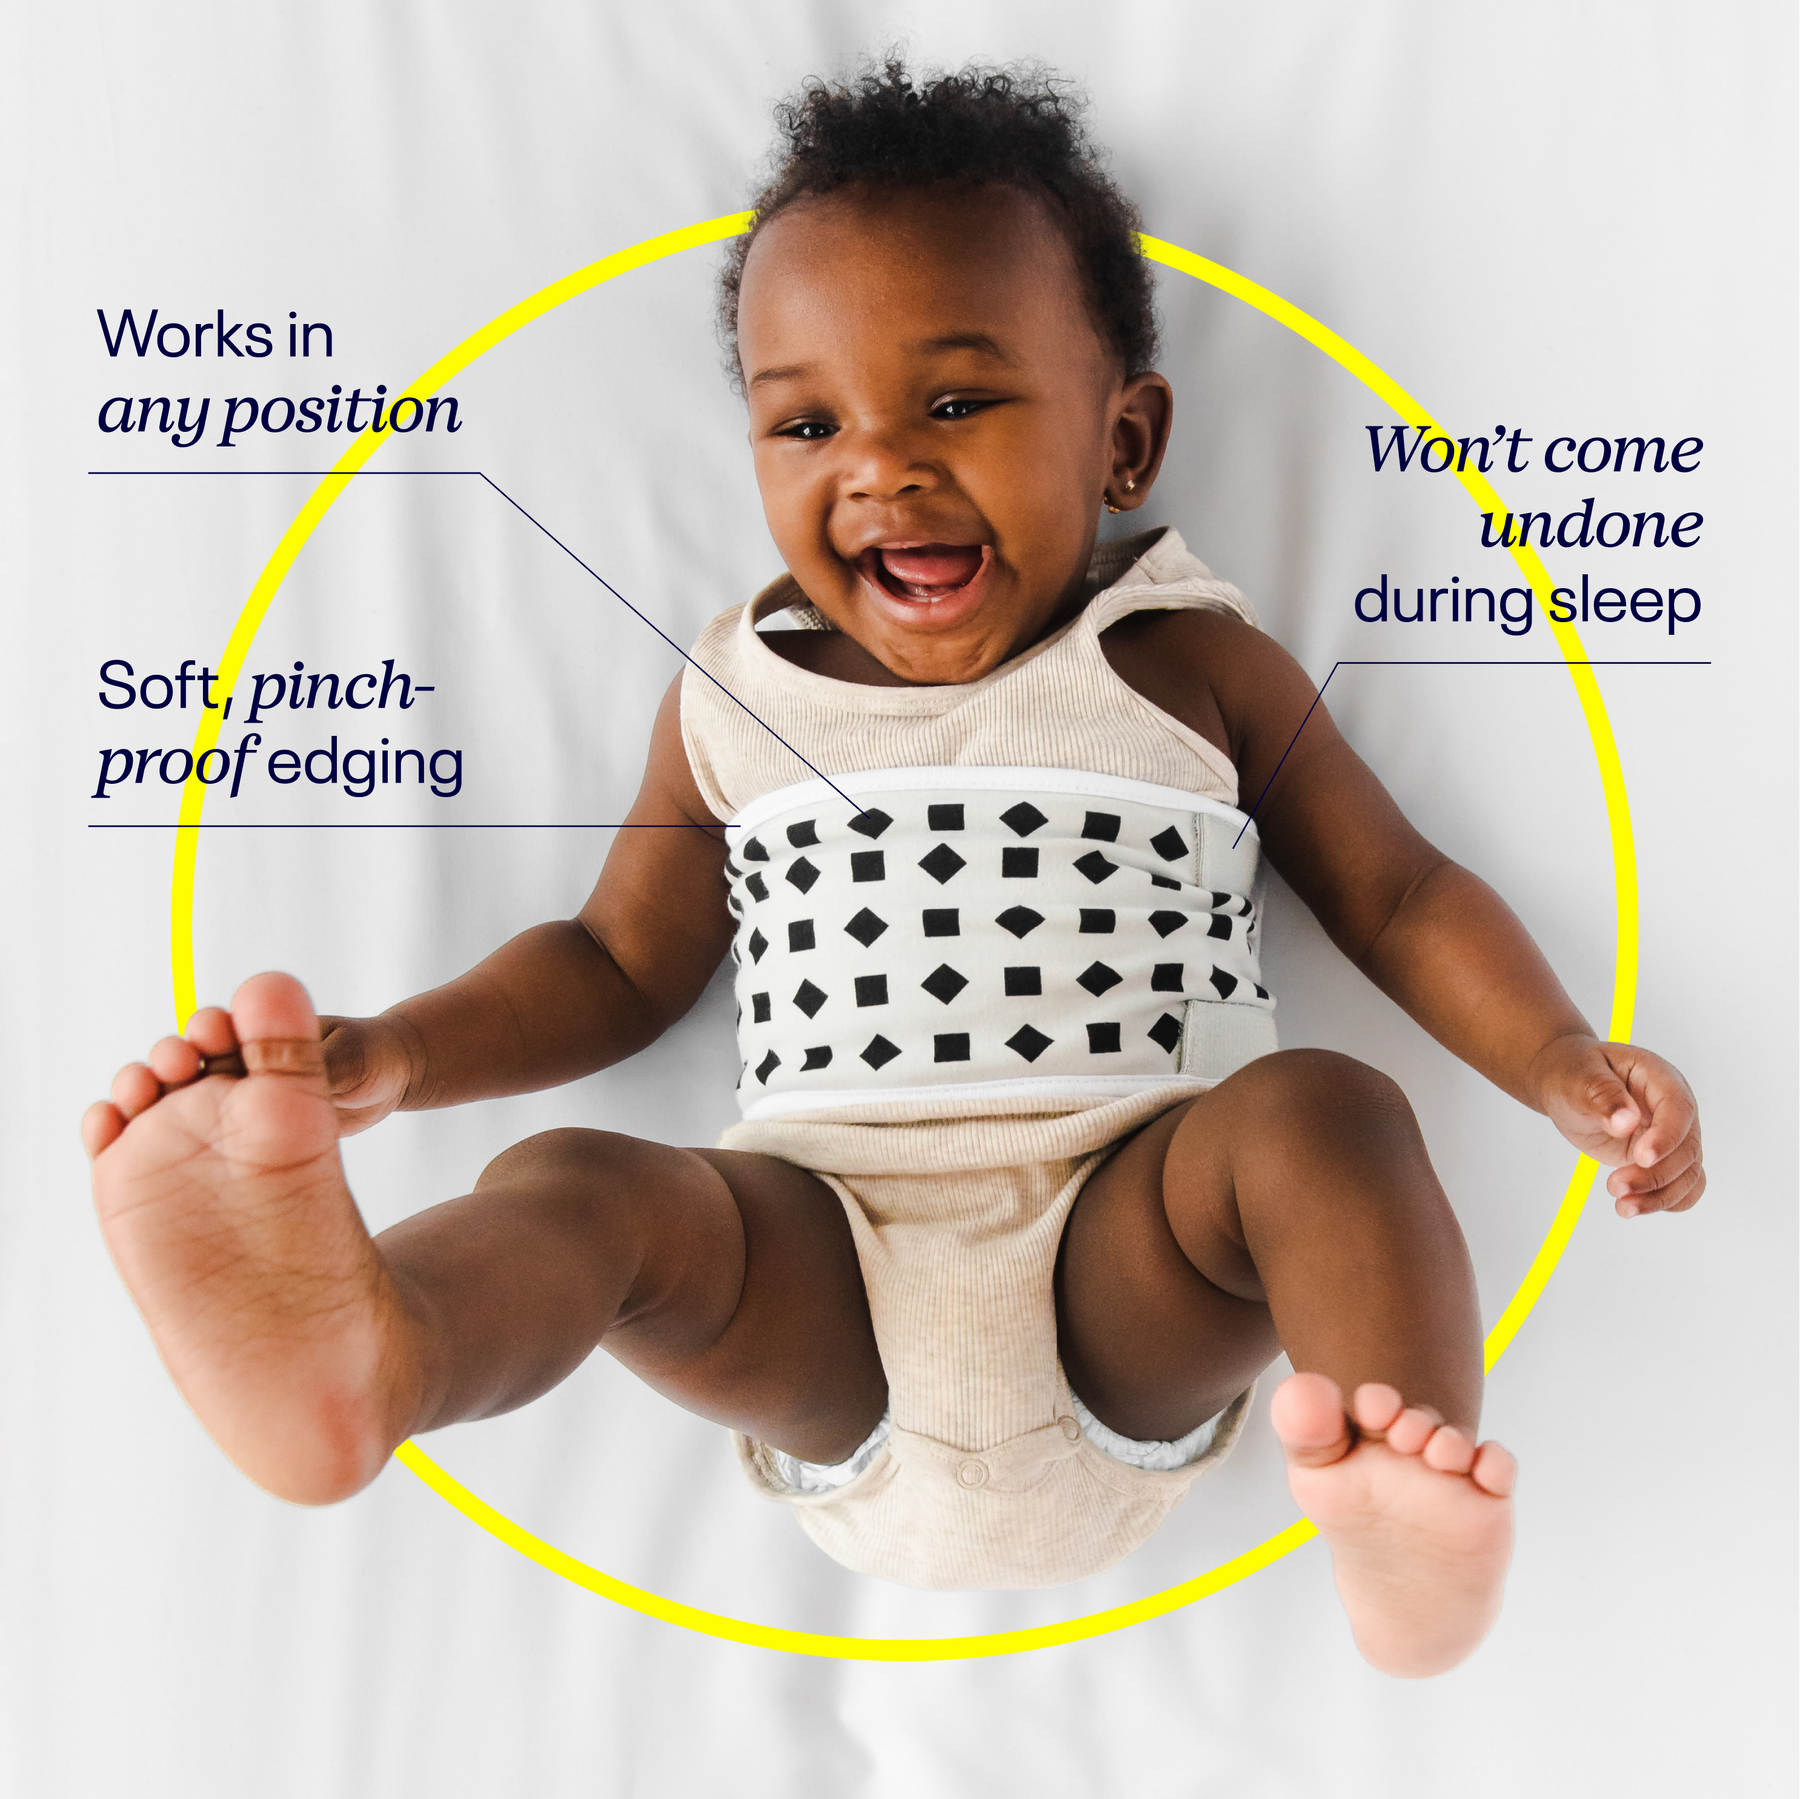 baby wearing breathing band - works in any position, soft pinch-proof edging, and won't come undone during sleep